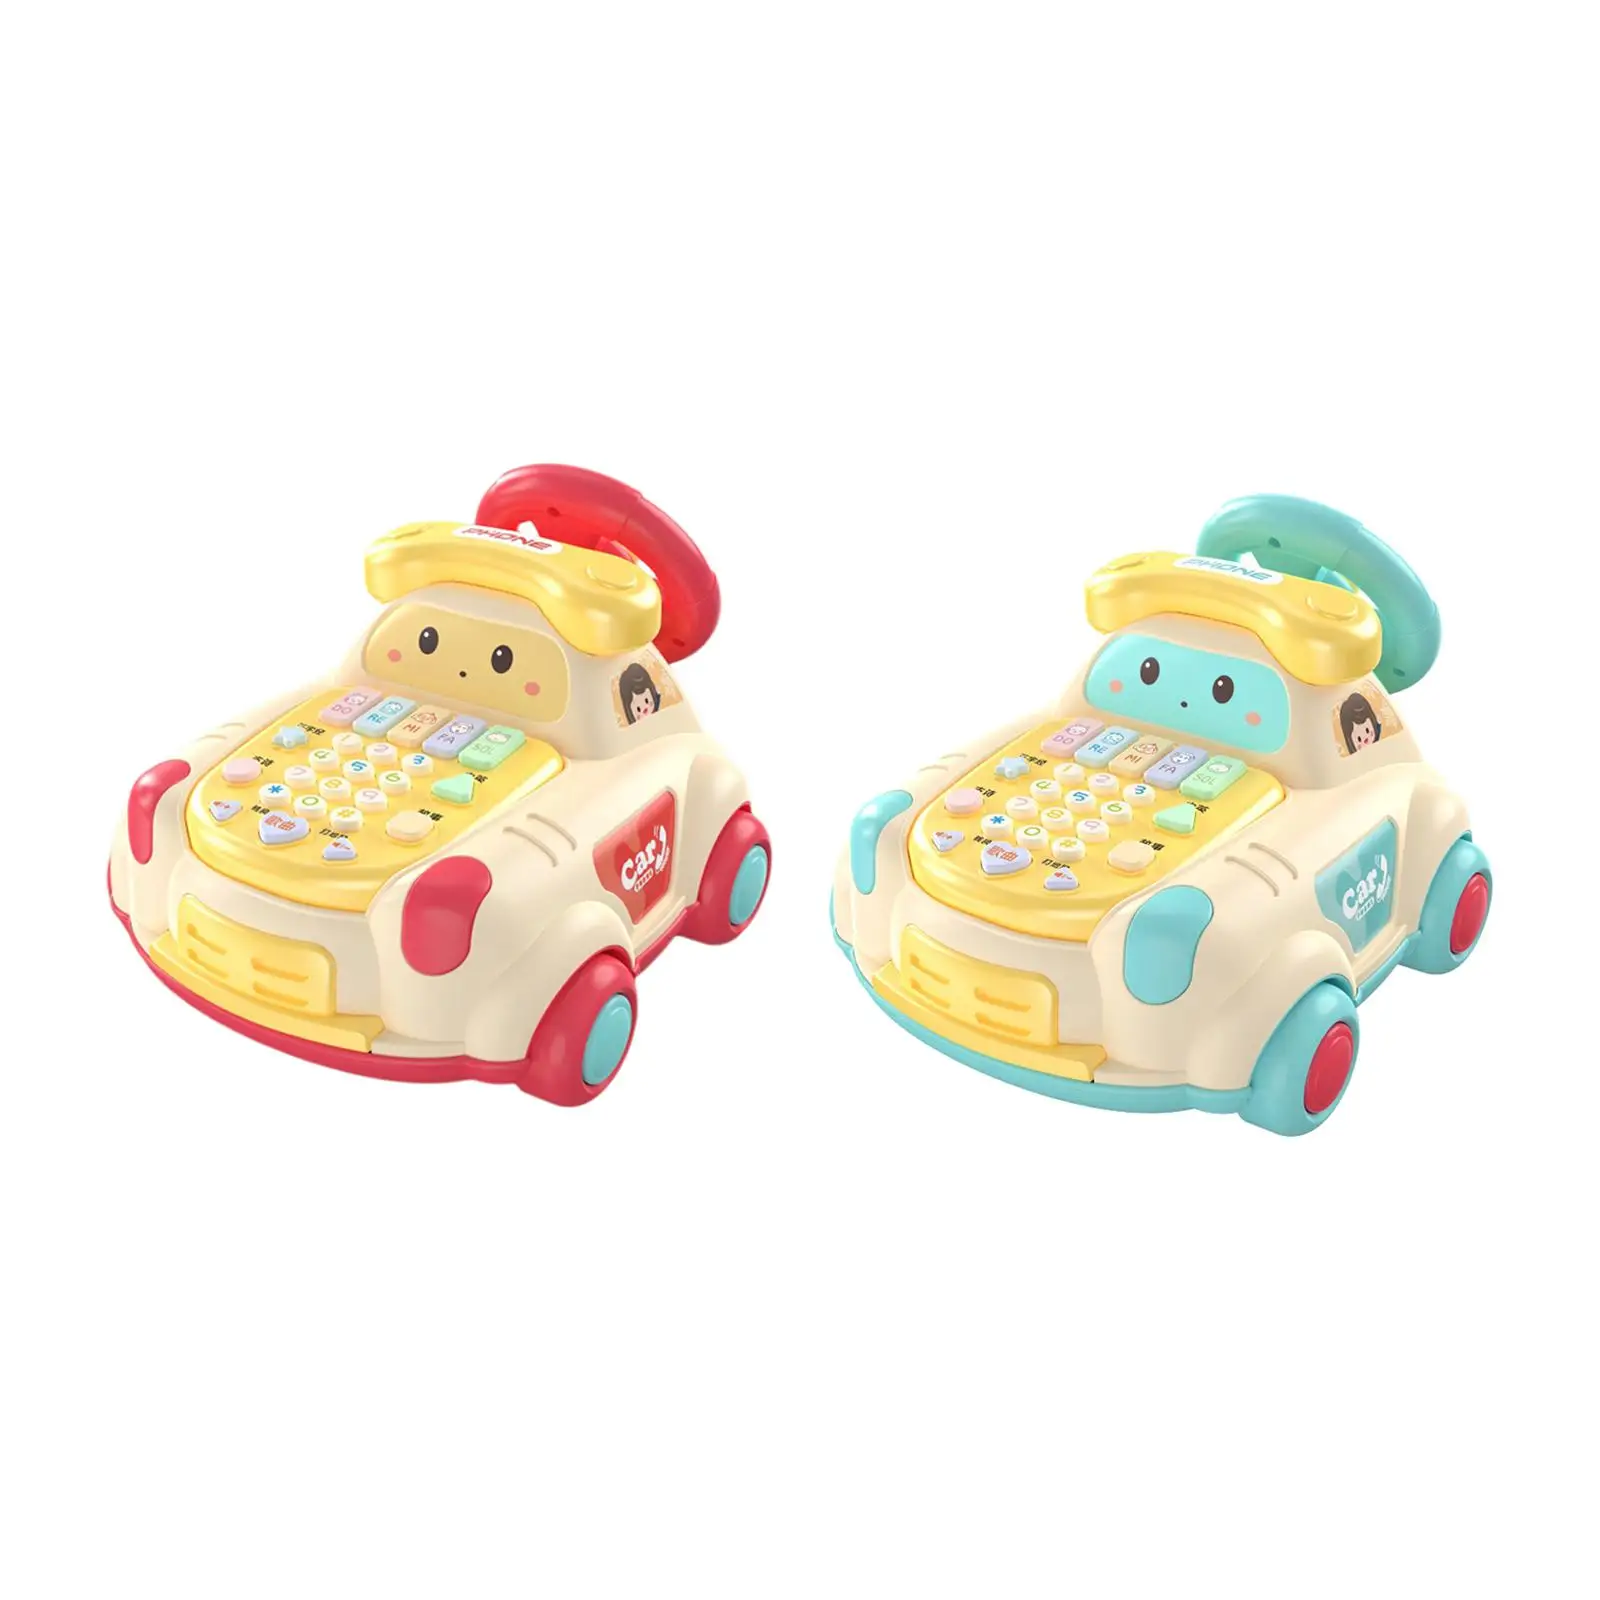 Music Light Phone baby Musical Toys Car for Preschool Learning Activity